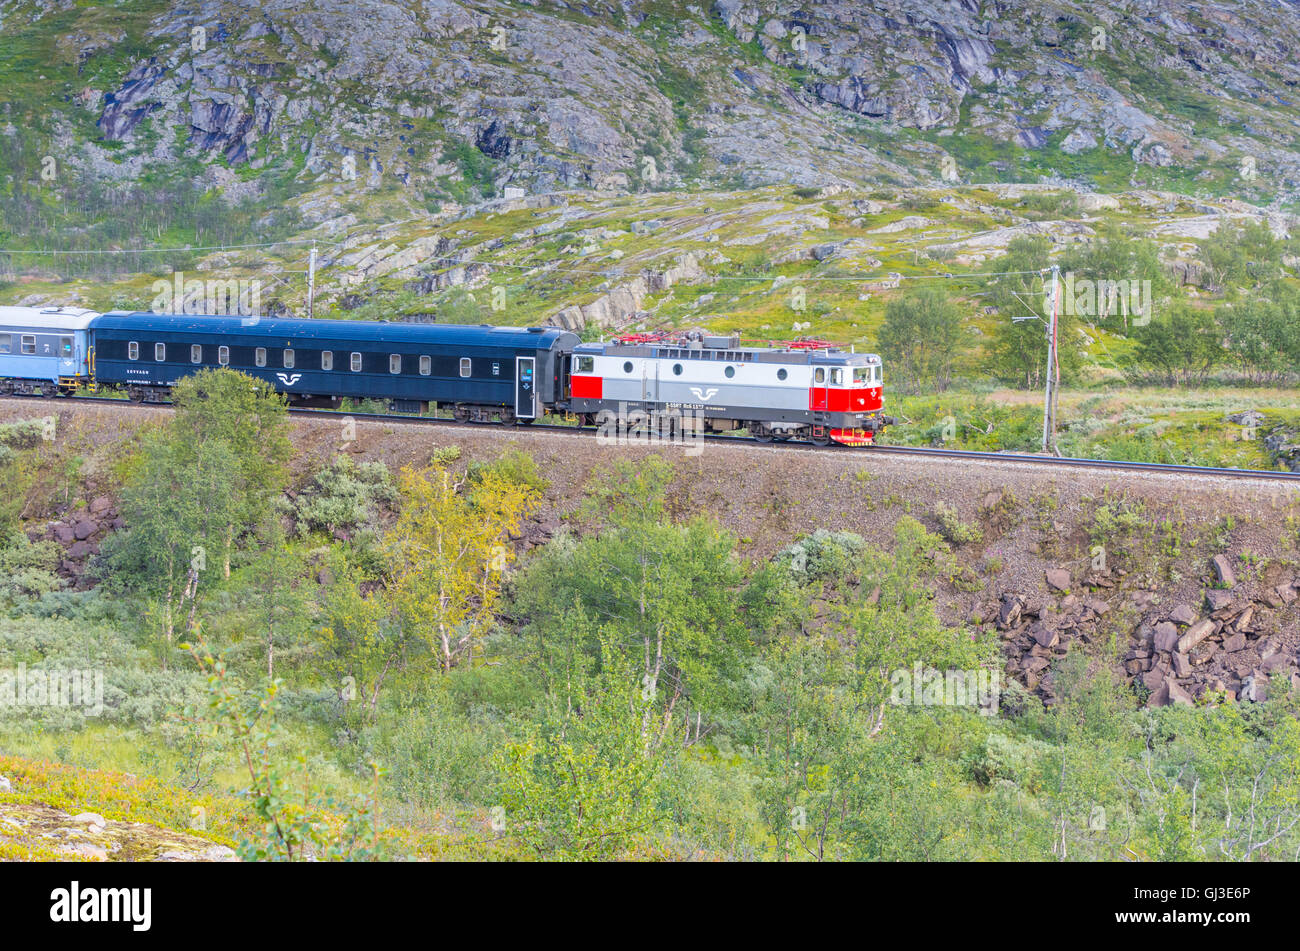 Silver and red locomotive train pulling carriages towards Bjornfell Station and Norway Swedish border Stock Photo